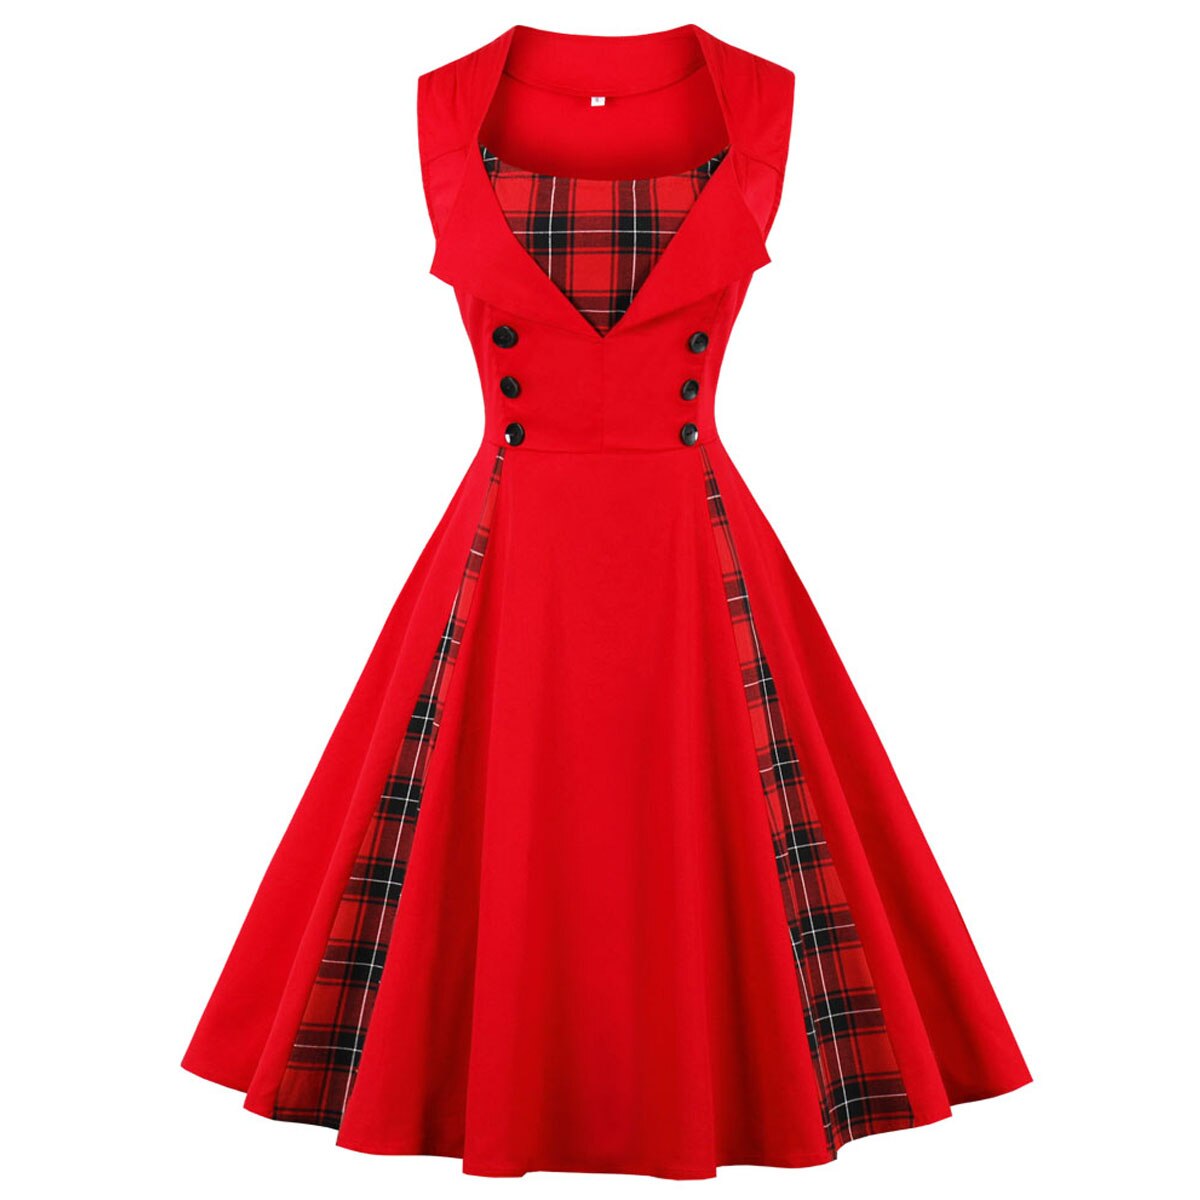 Robe Vintage 50s 60s Retro Cotton Patchwork Pin Up Swing Party Polka Dot Women Casual Dresses